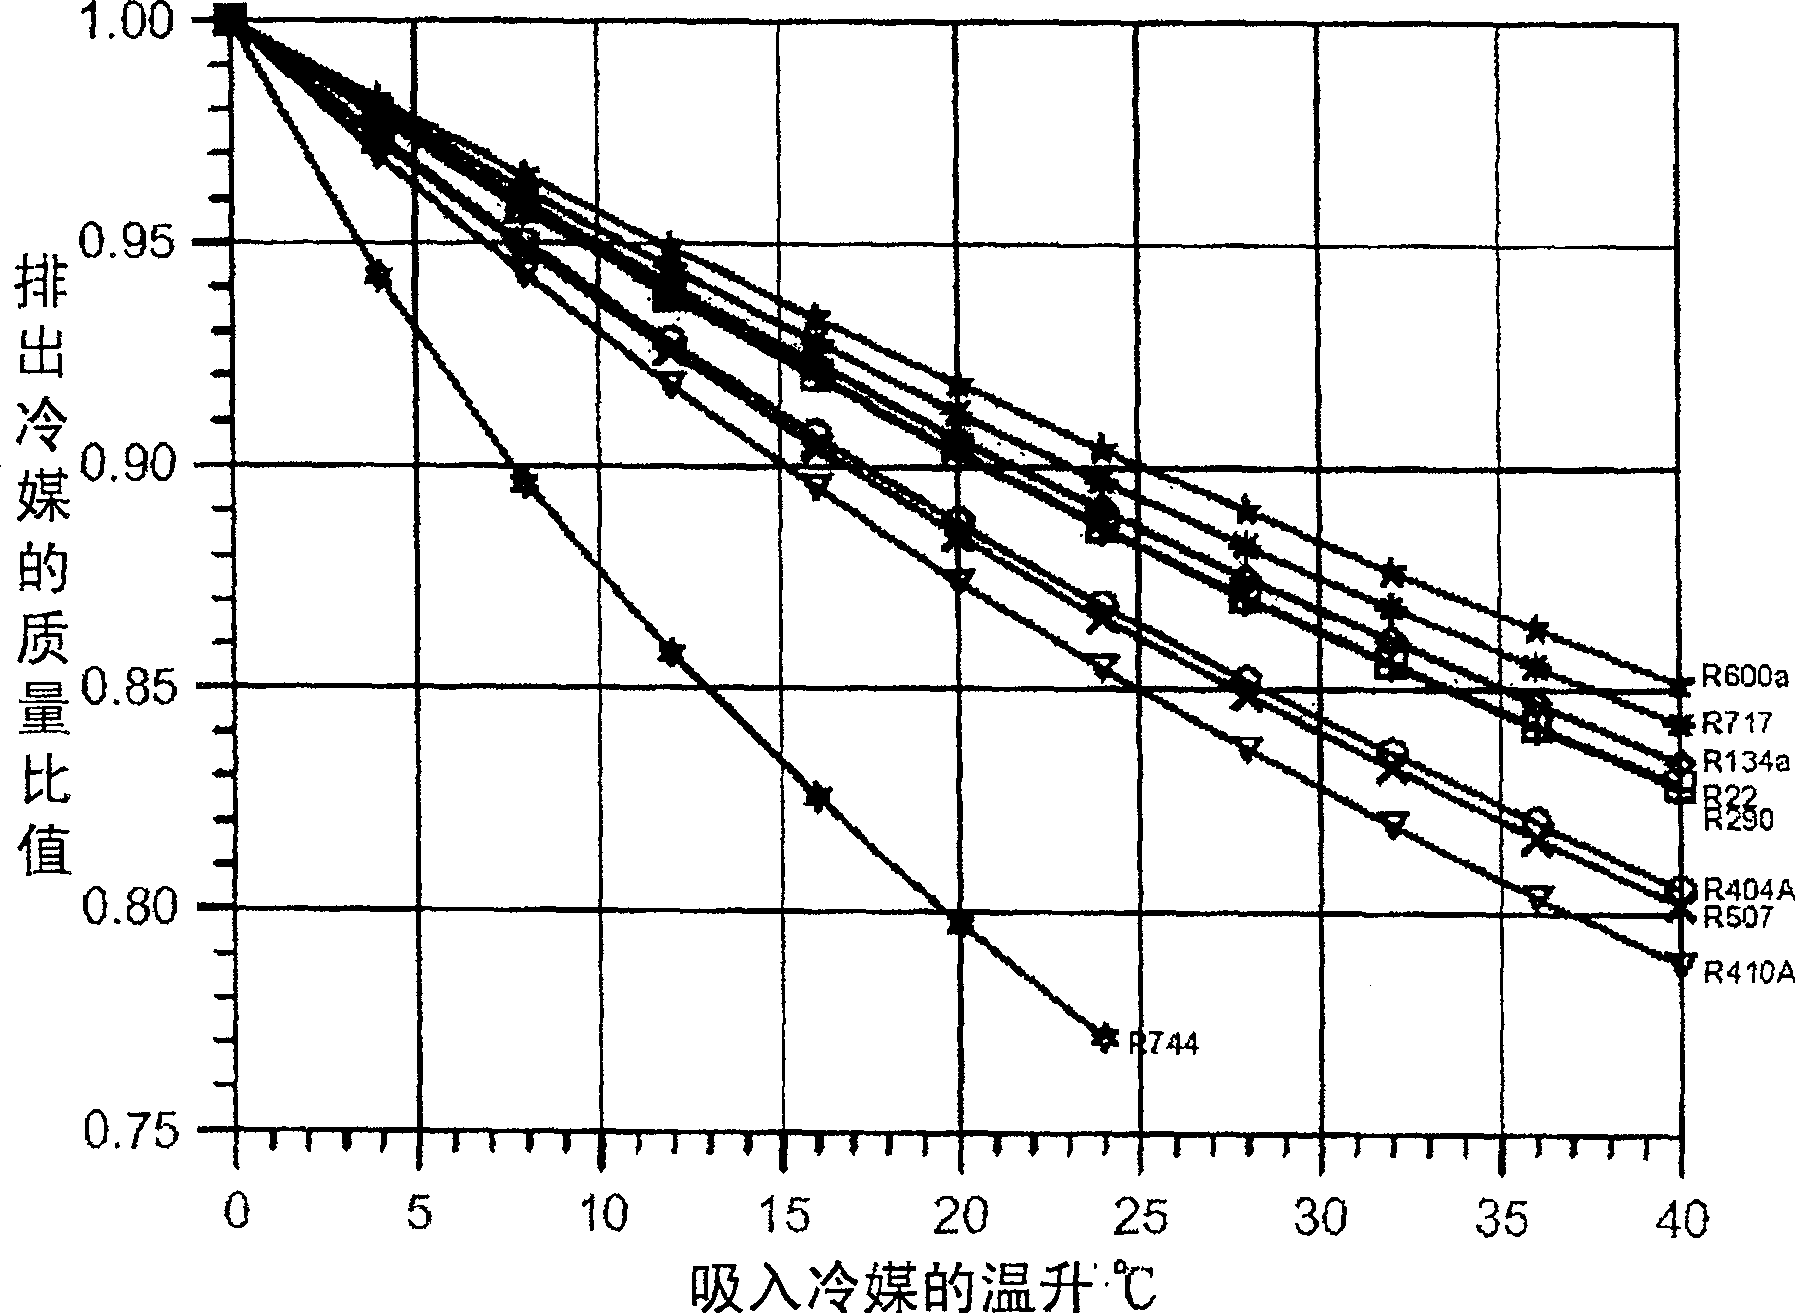 Air inlet structure of reciprocating compressor